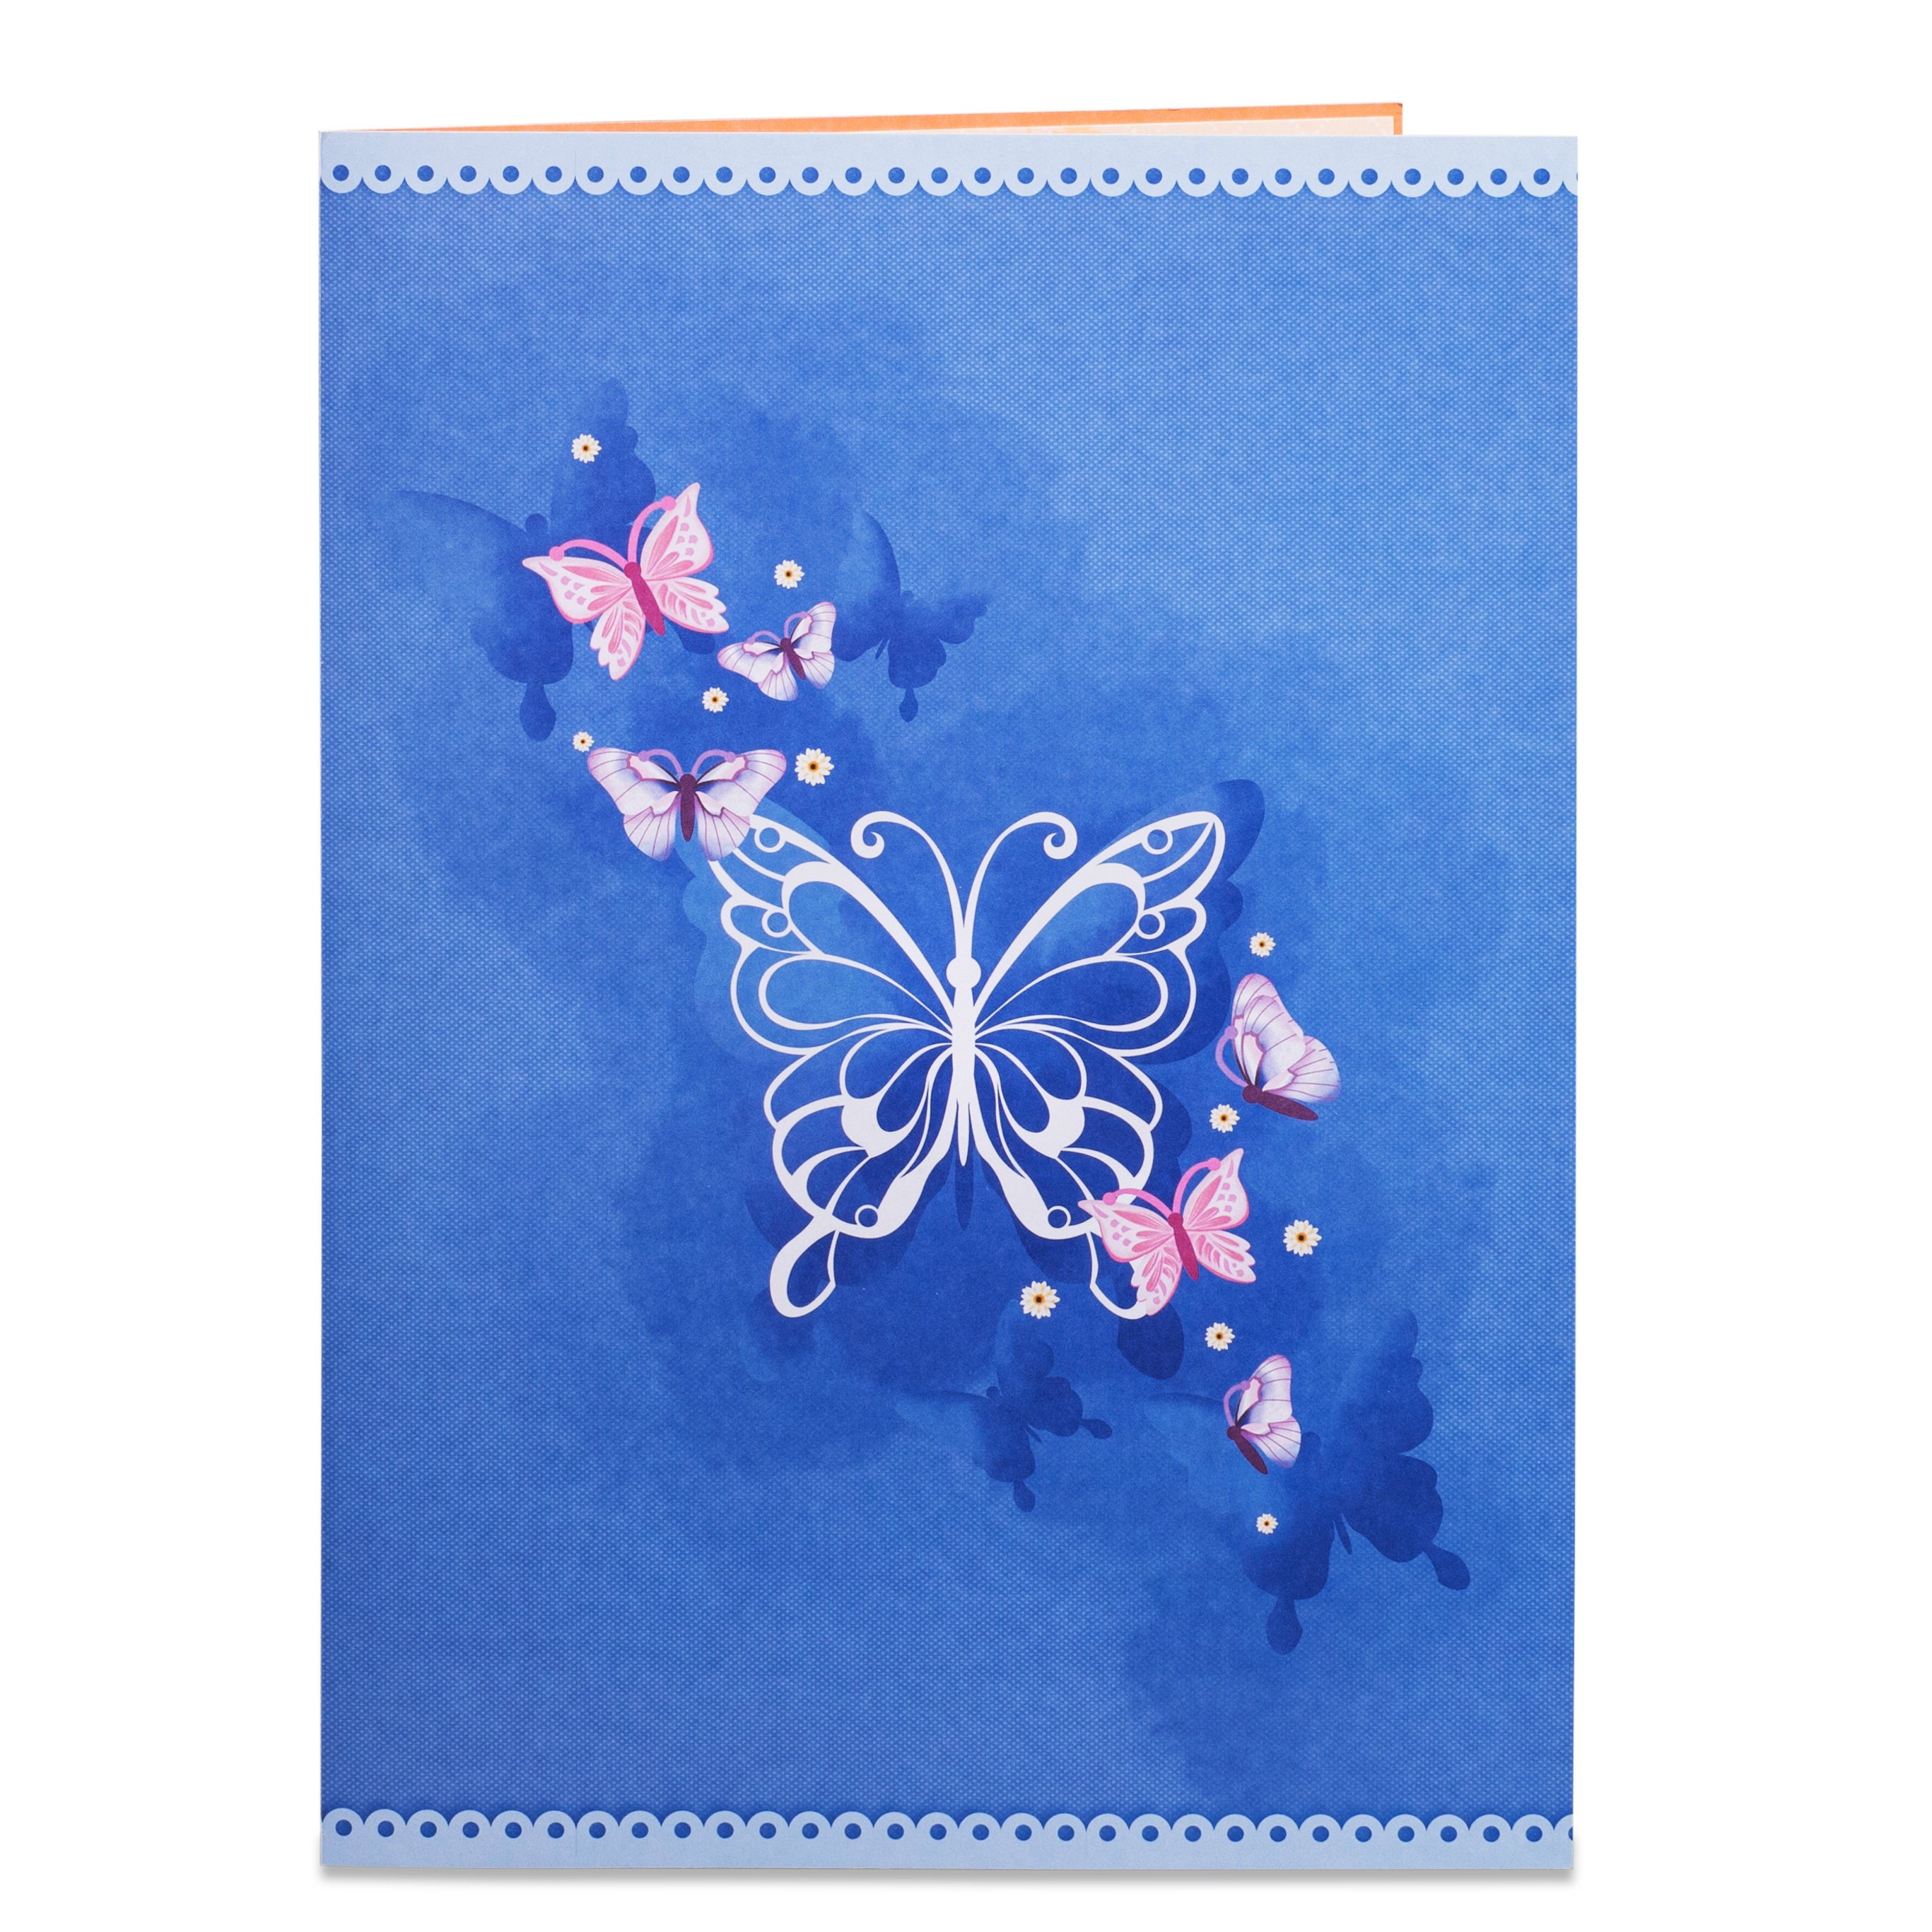 Paper Love Hugepop Butterfly Pop up Flower Bouquet, with Detachable  Flowers, Gif